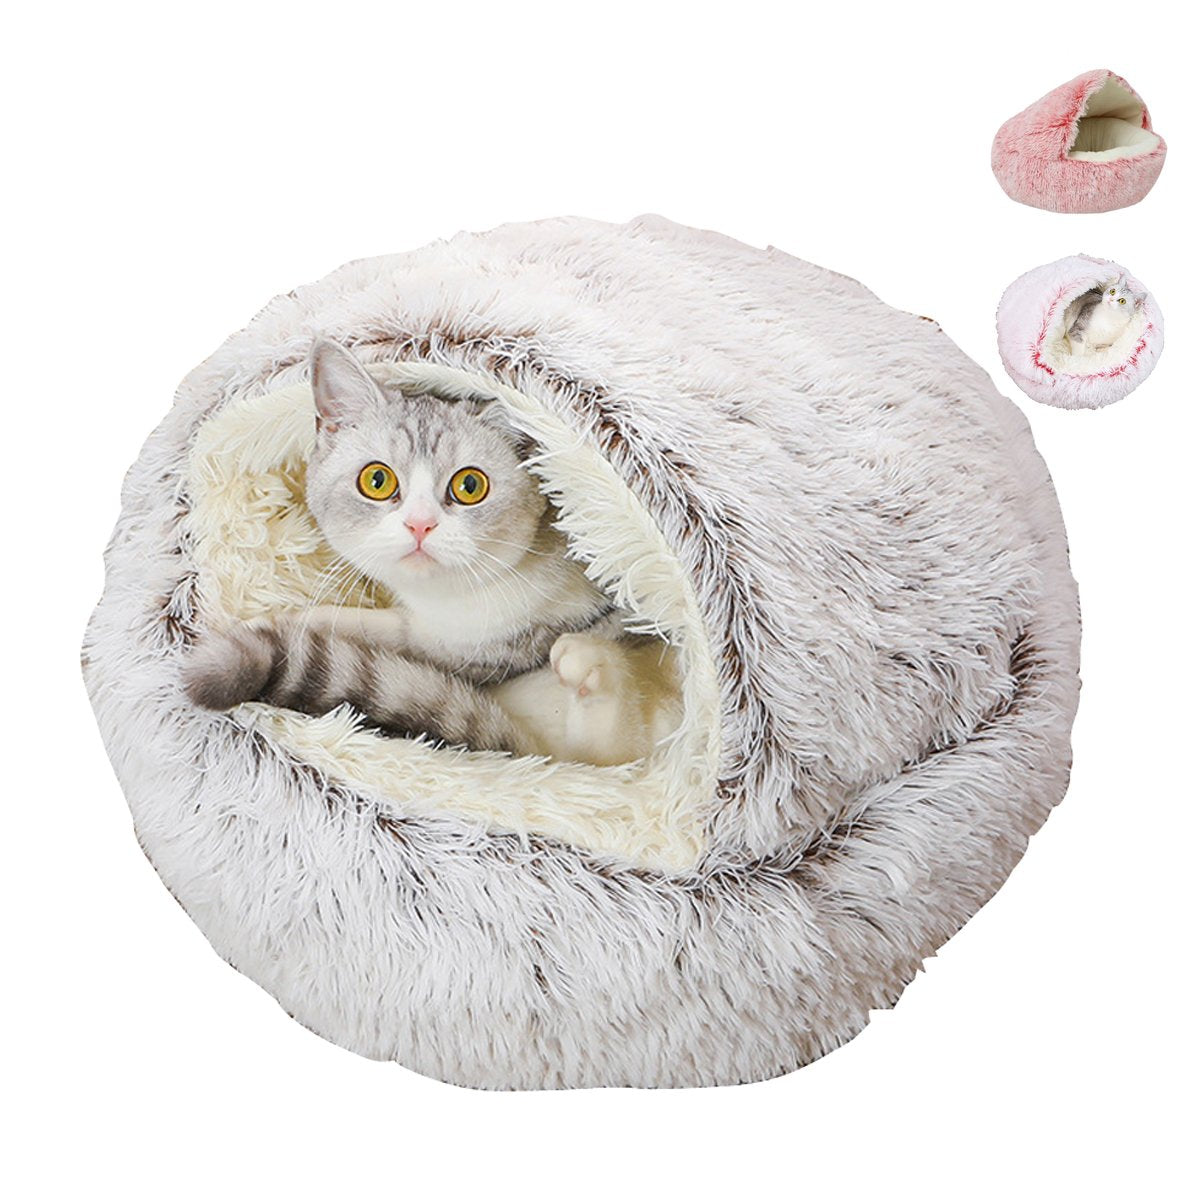 Cozy nook Cave Beds for Dogs cat Nesting bed Heating warm Winter